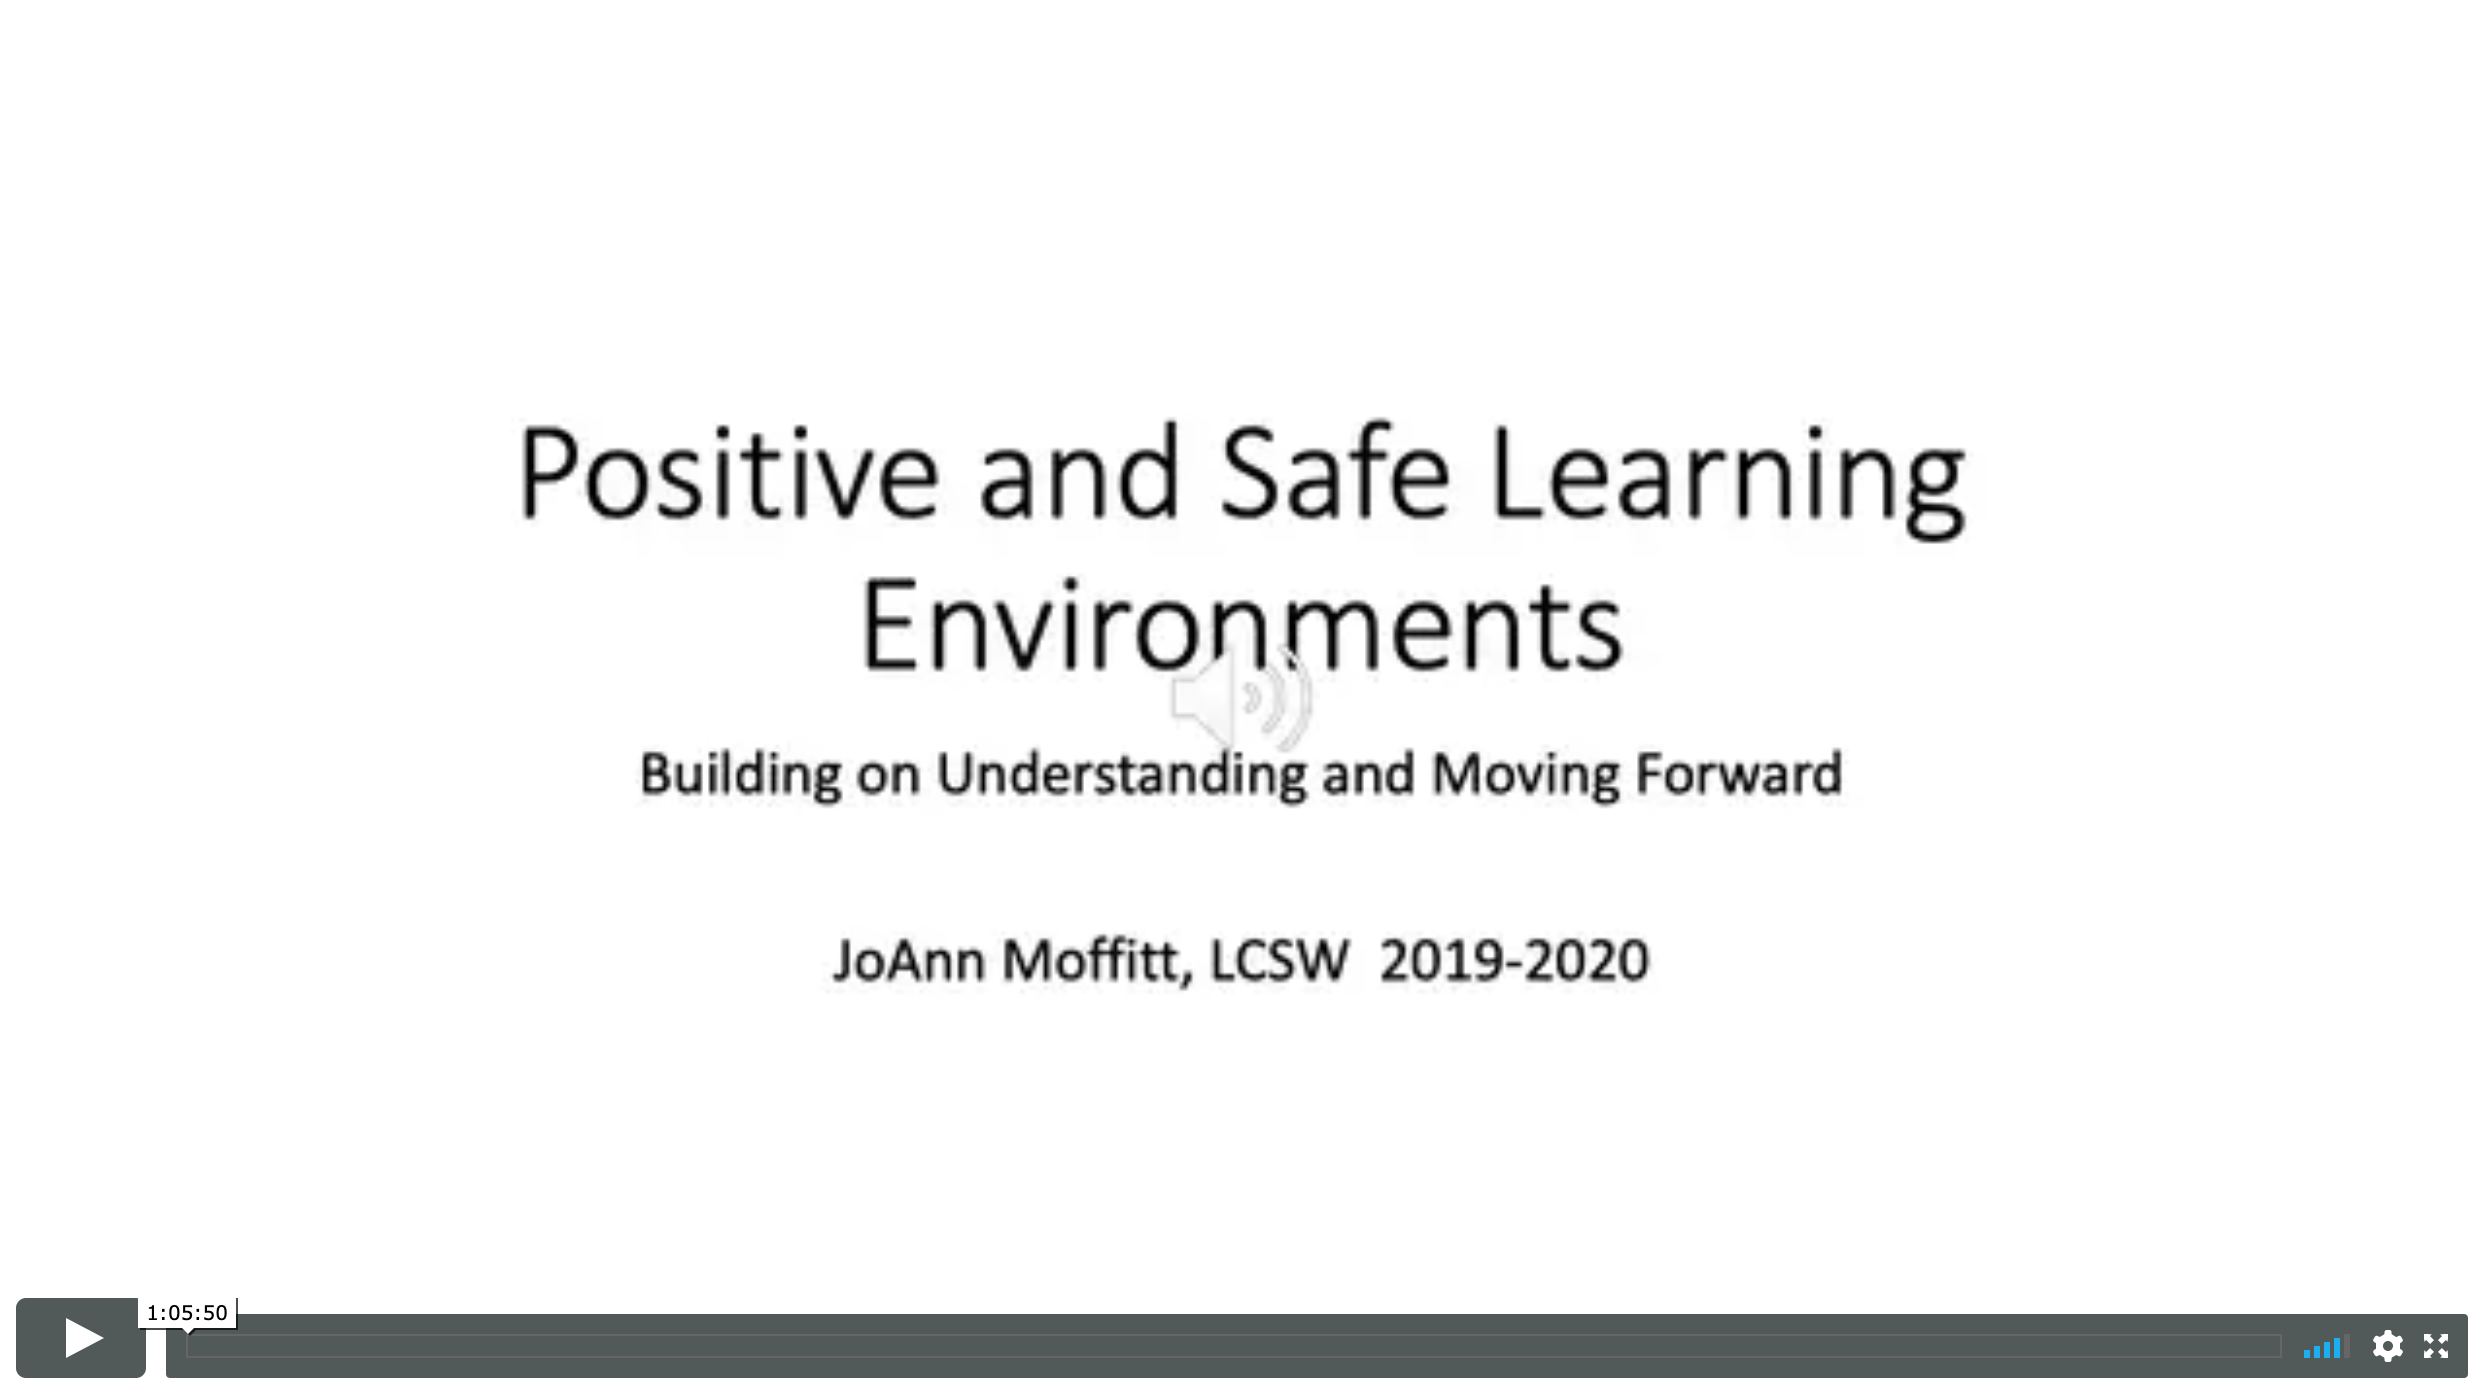 Positive and Safe Learning Environments